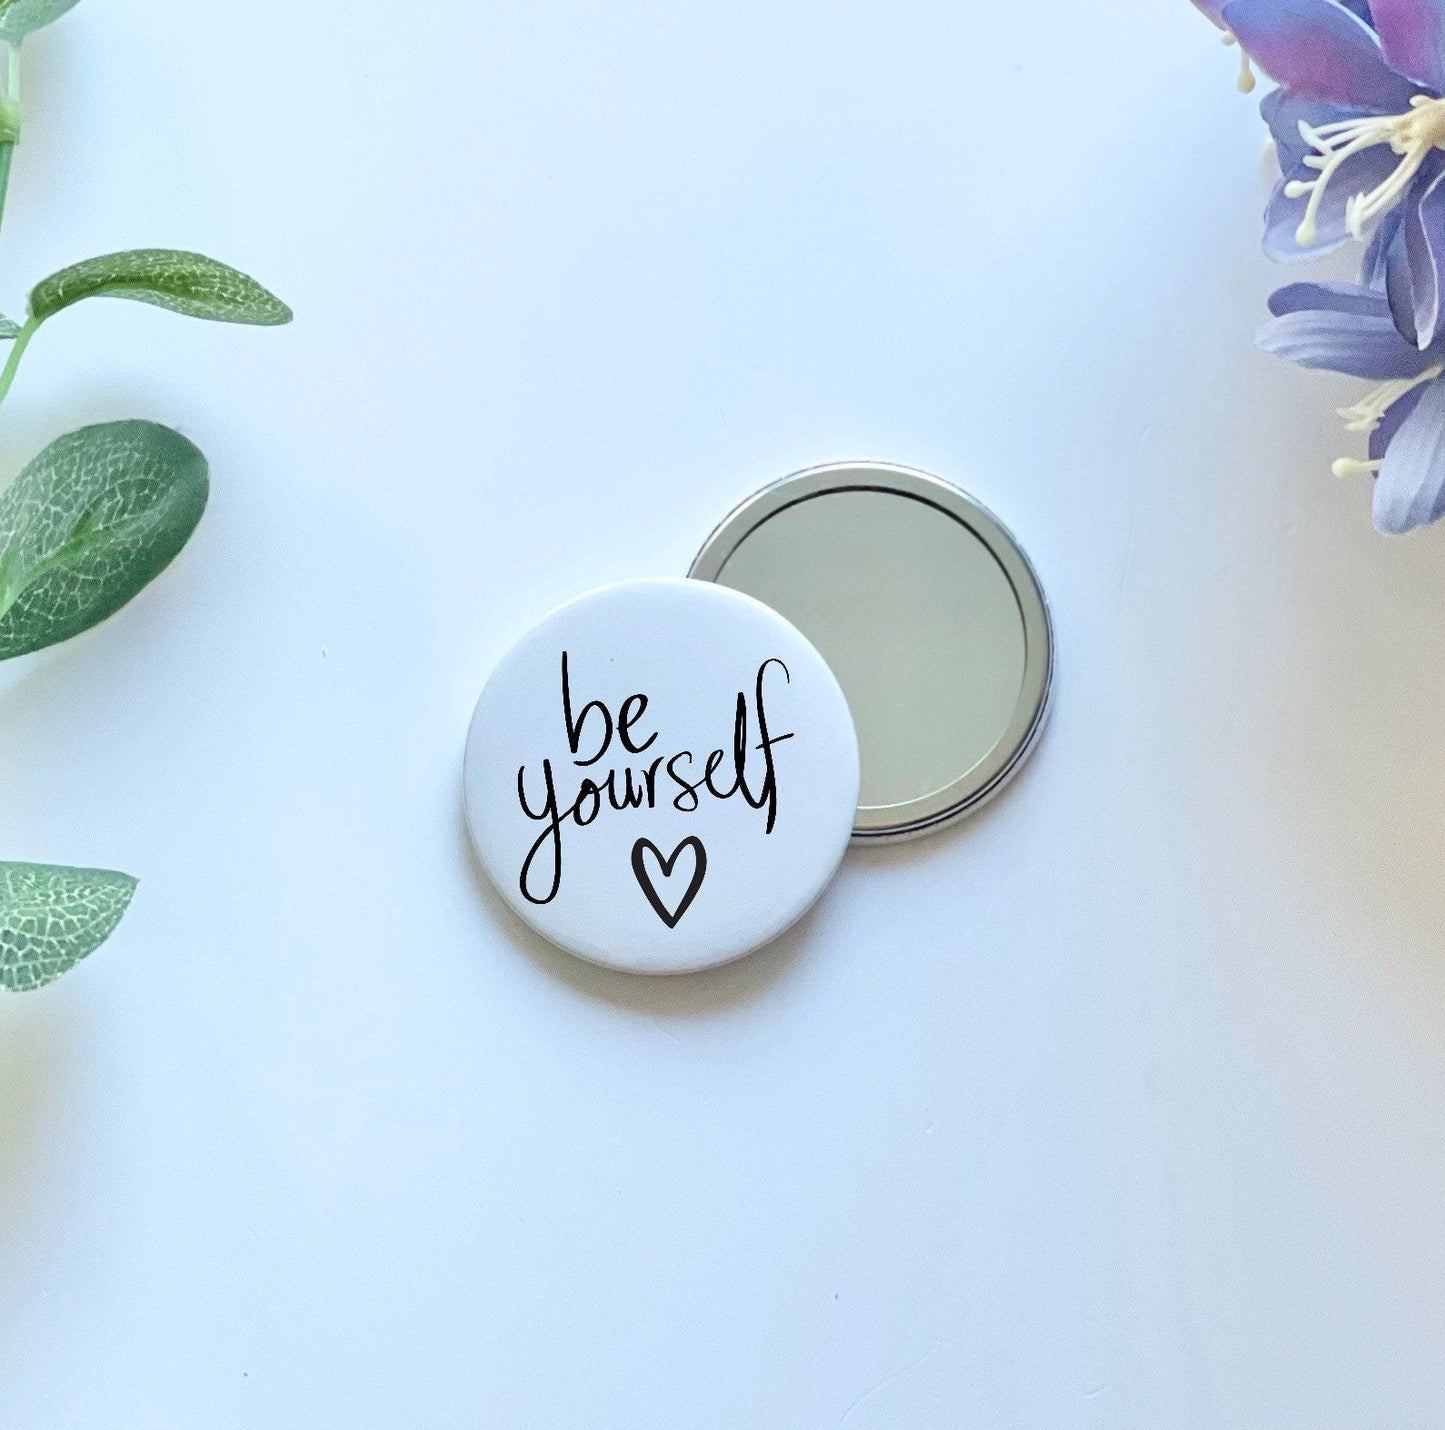 Personalised compact mirror, positivity quote pocket mirror,Christmas stocking fillers,friend birthday gift,colleague secret santa